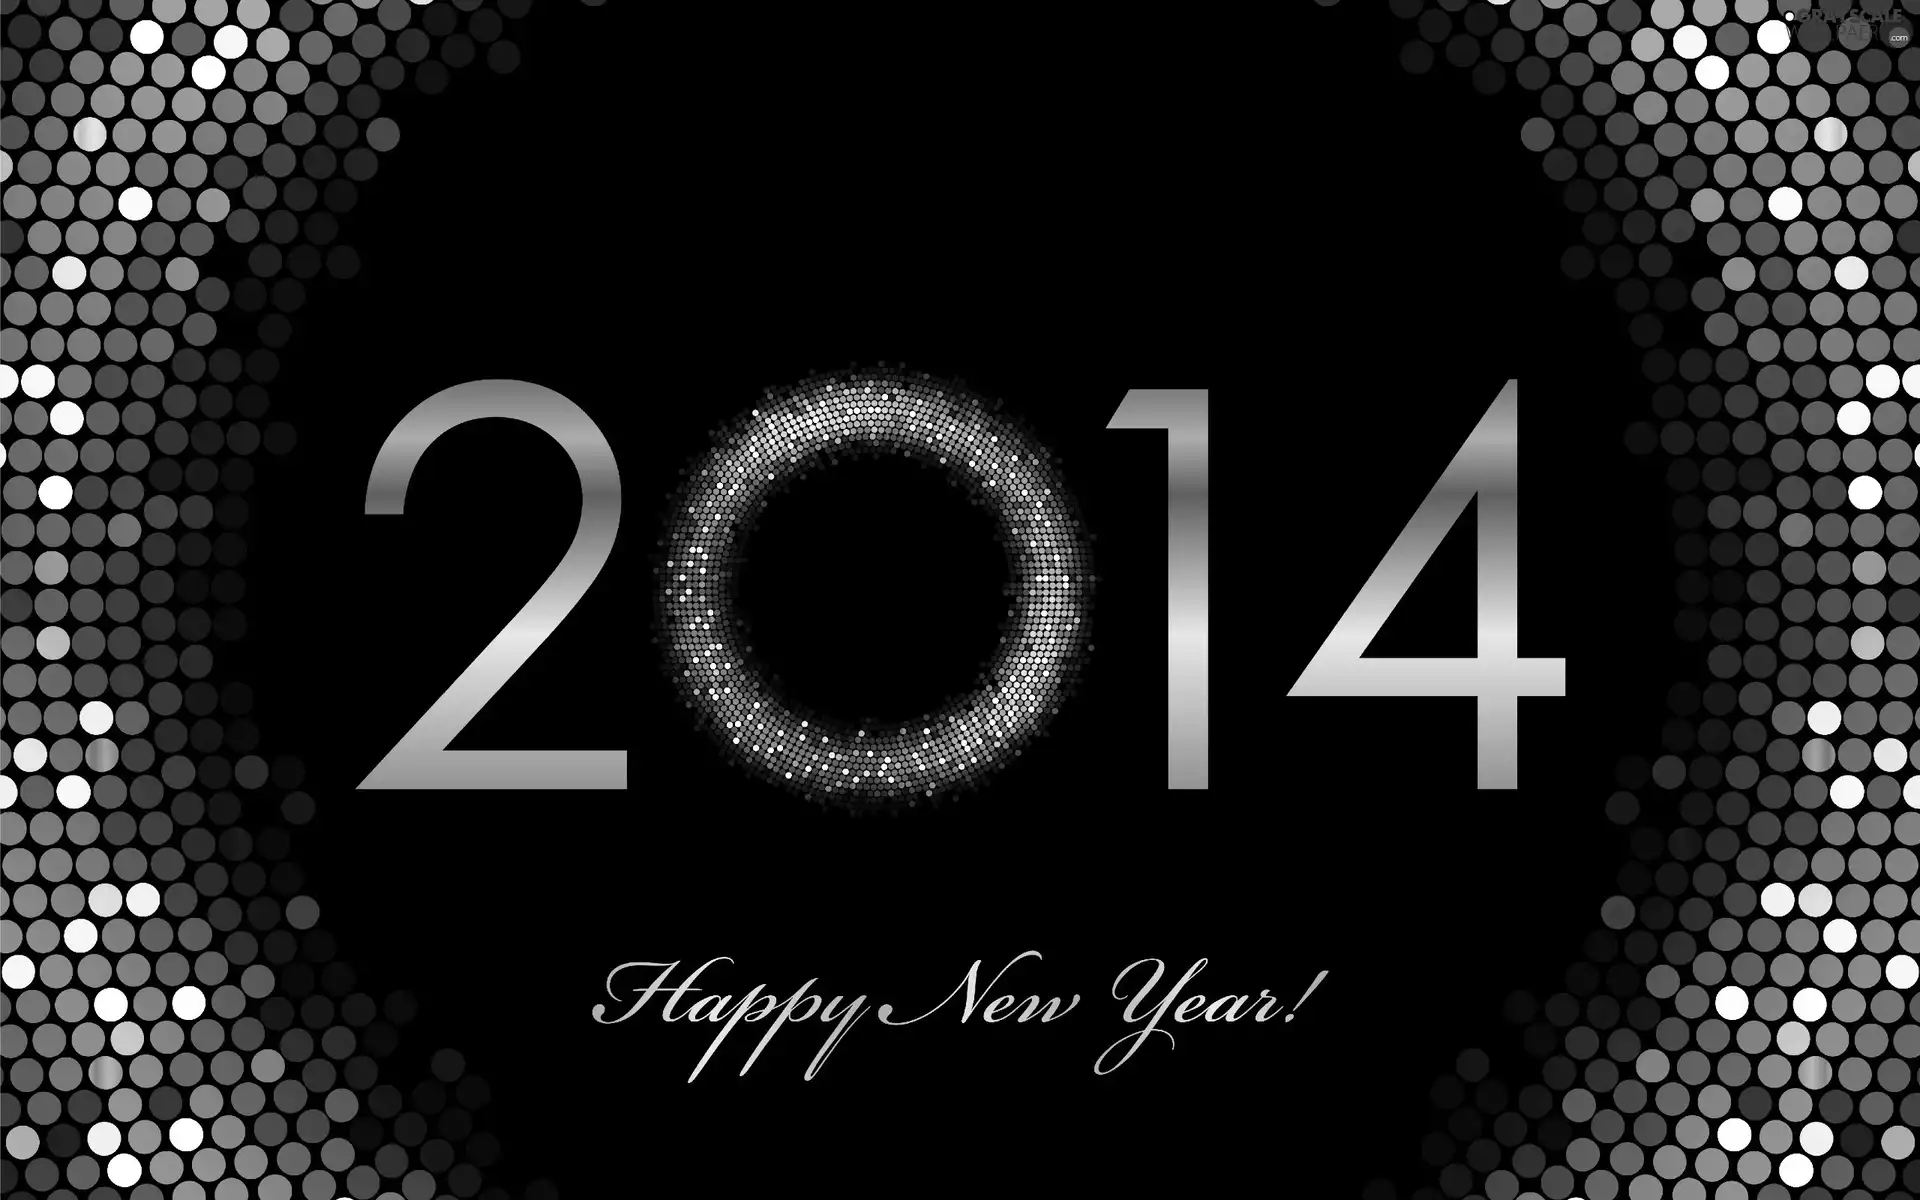 text, graphics, New, year, Happy